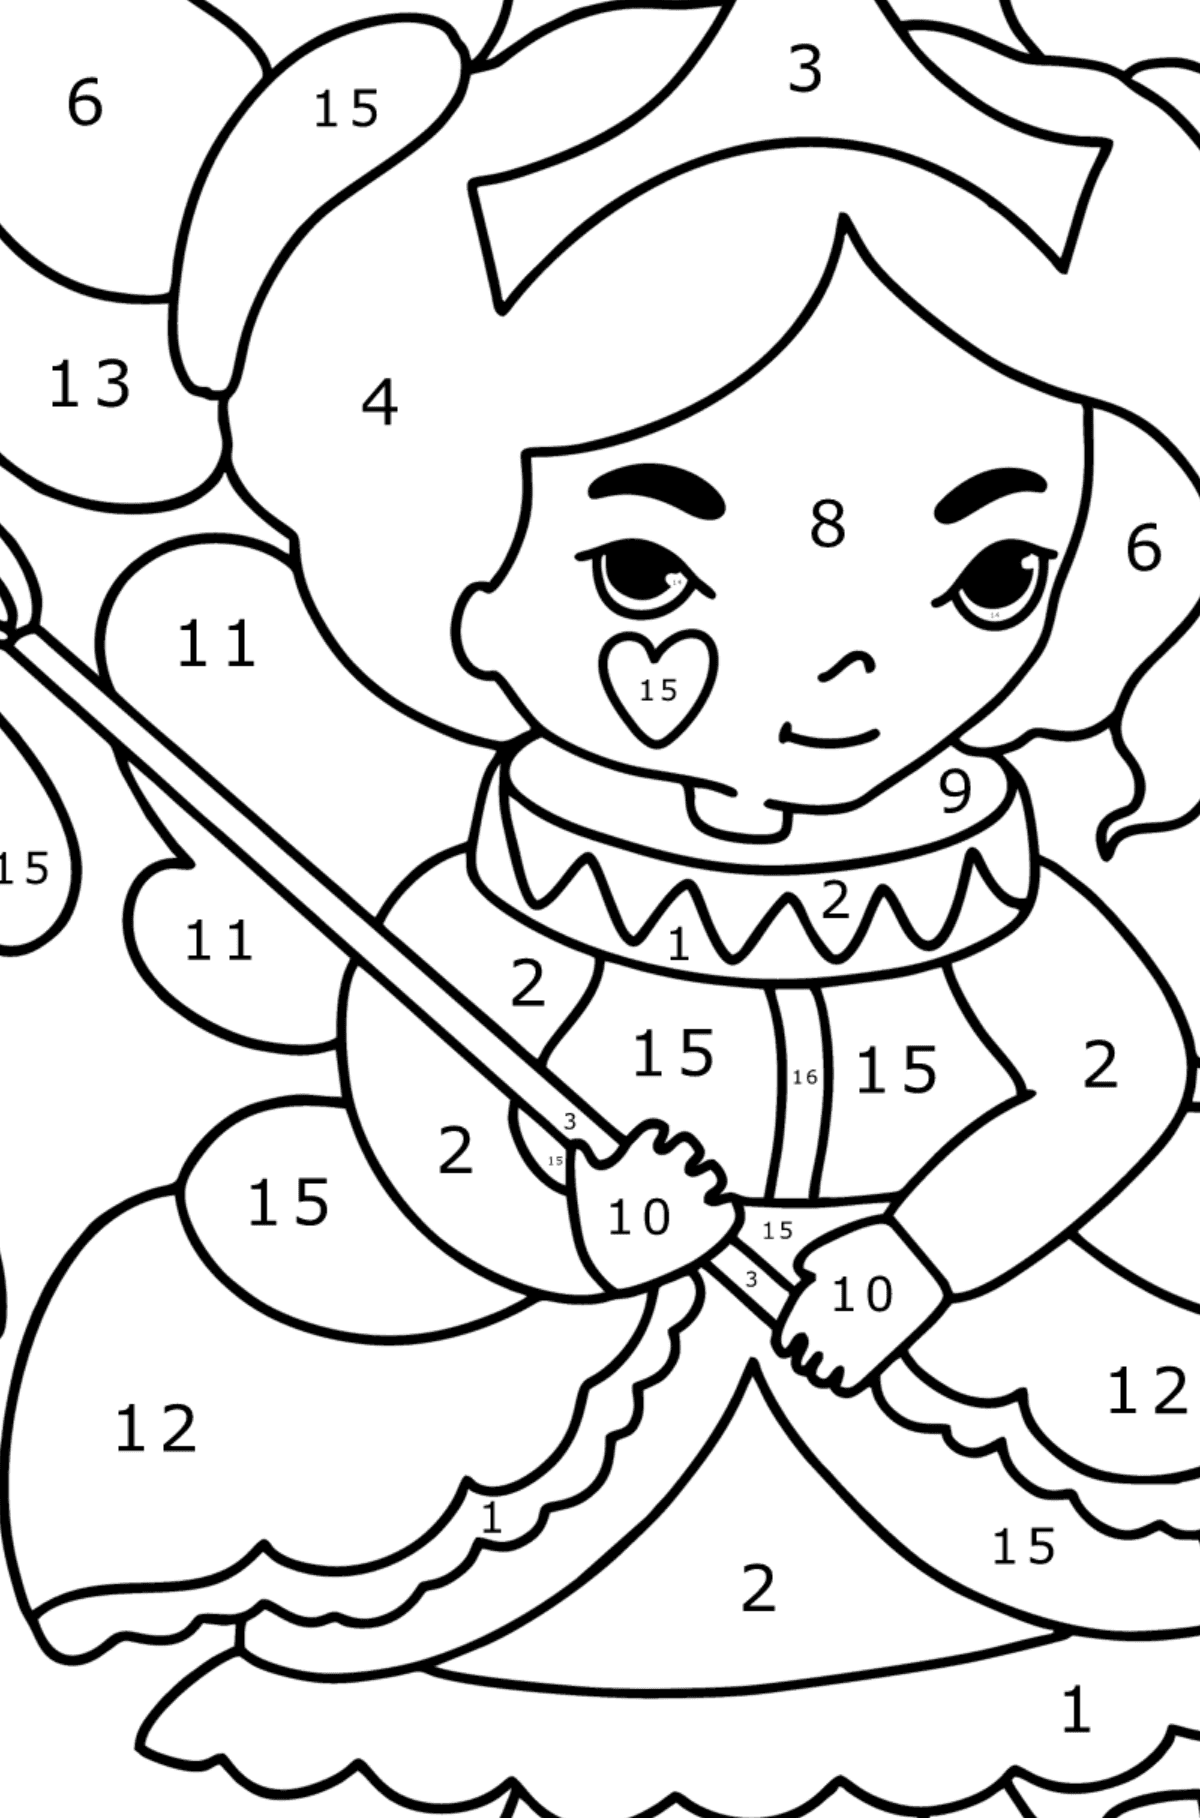 Fairy in a beautiful dress coloring page - Coloring by Numbers for Kids